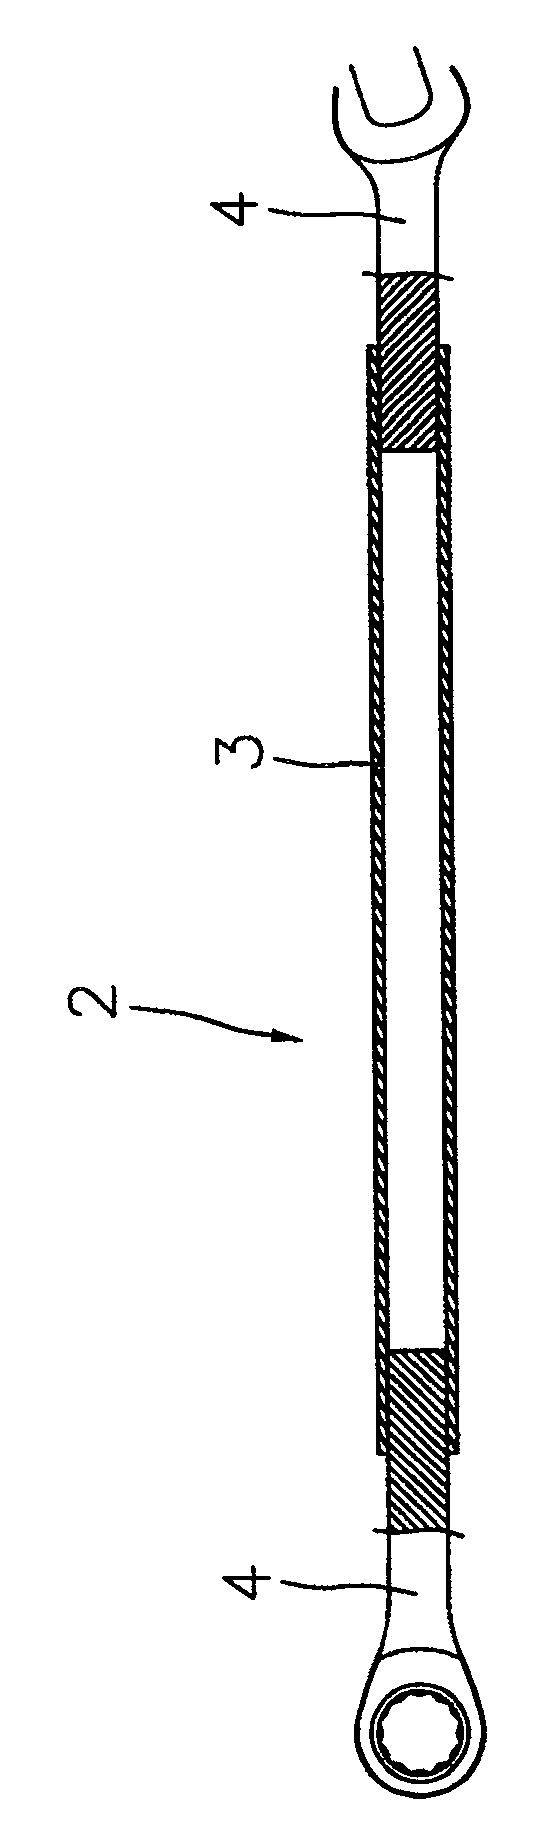 Lengthened type wrench joining structure